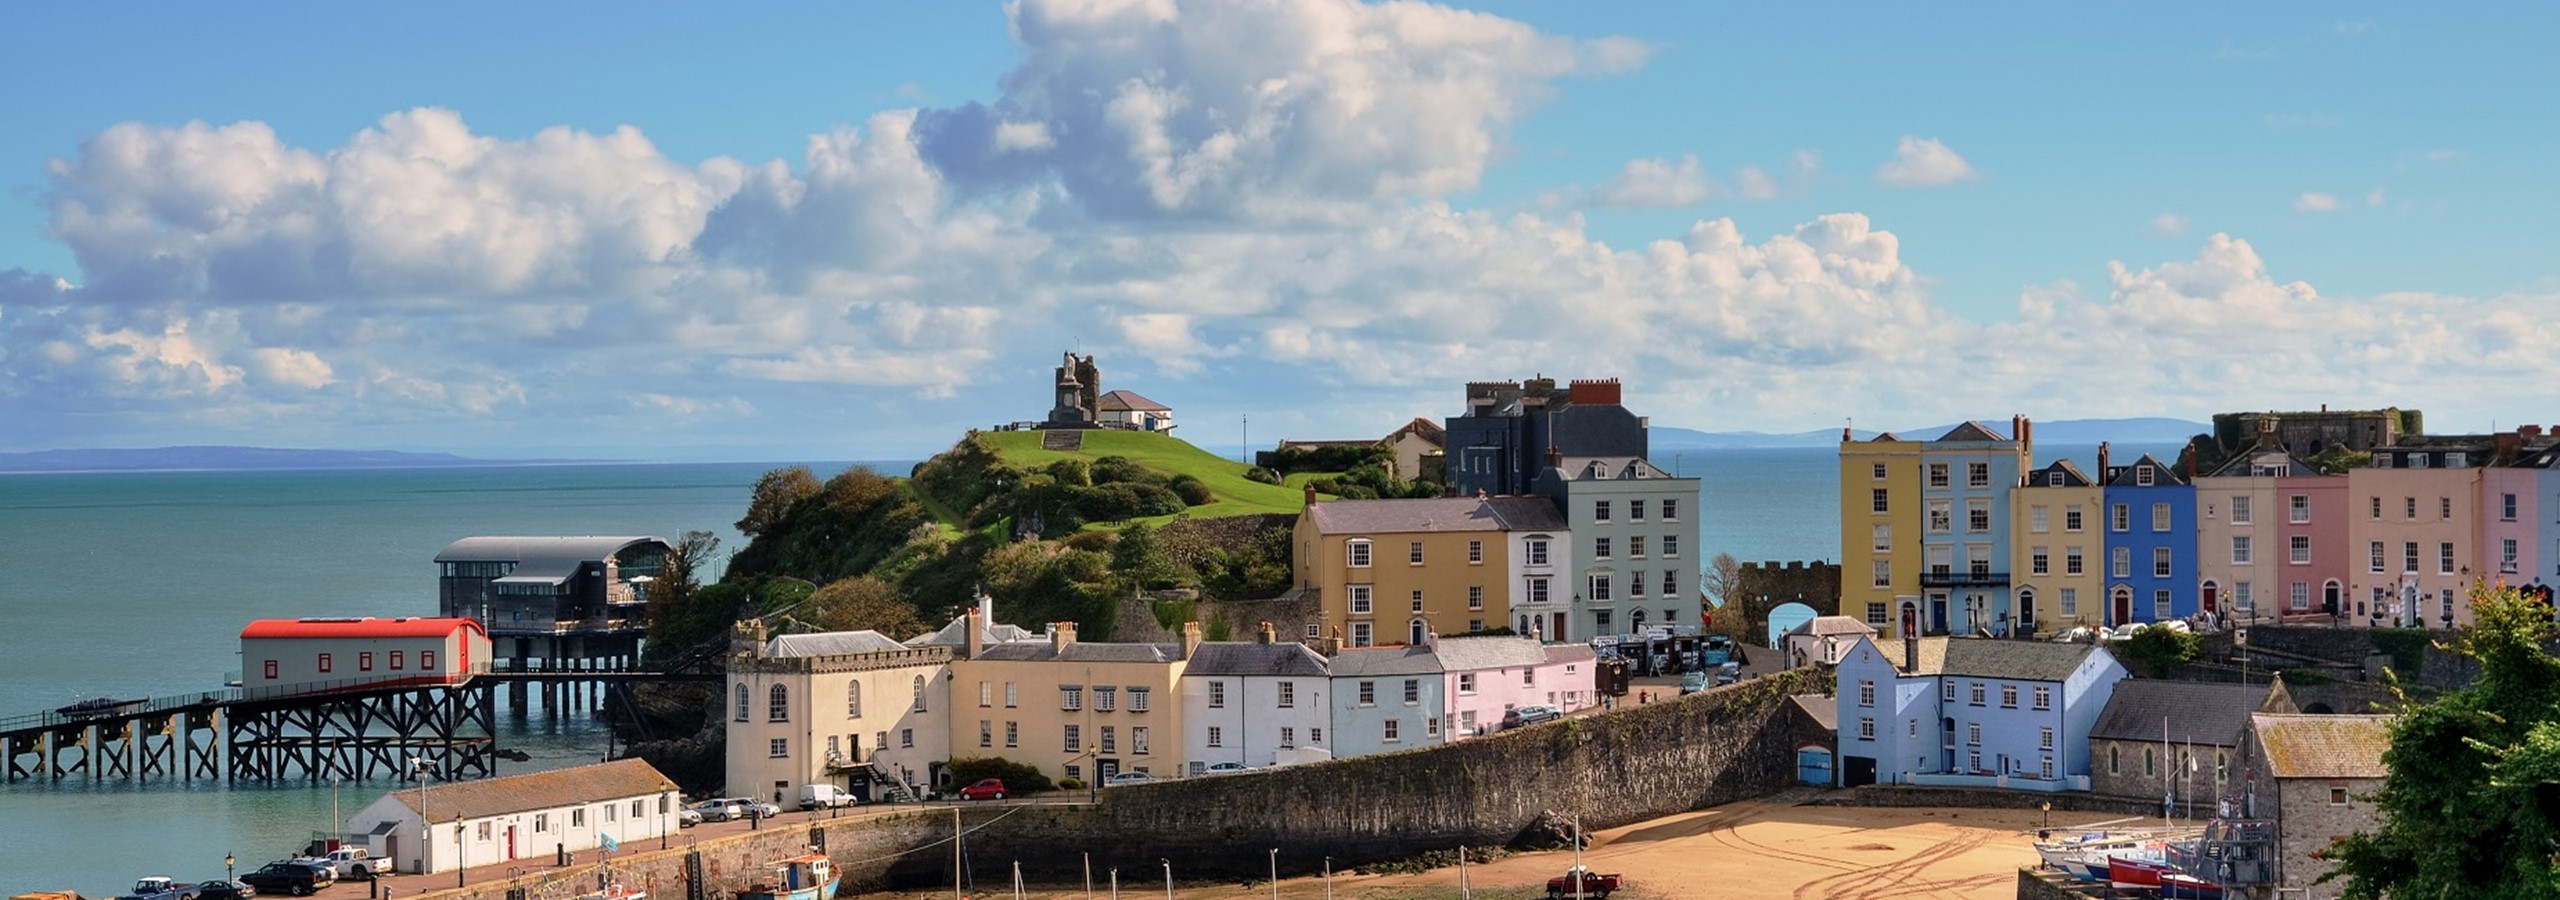 Exploring a millennium of rich history in Tenby